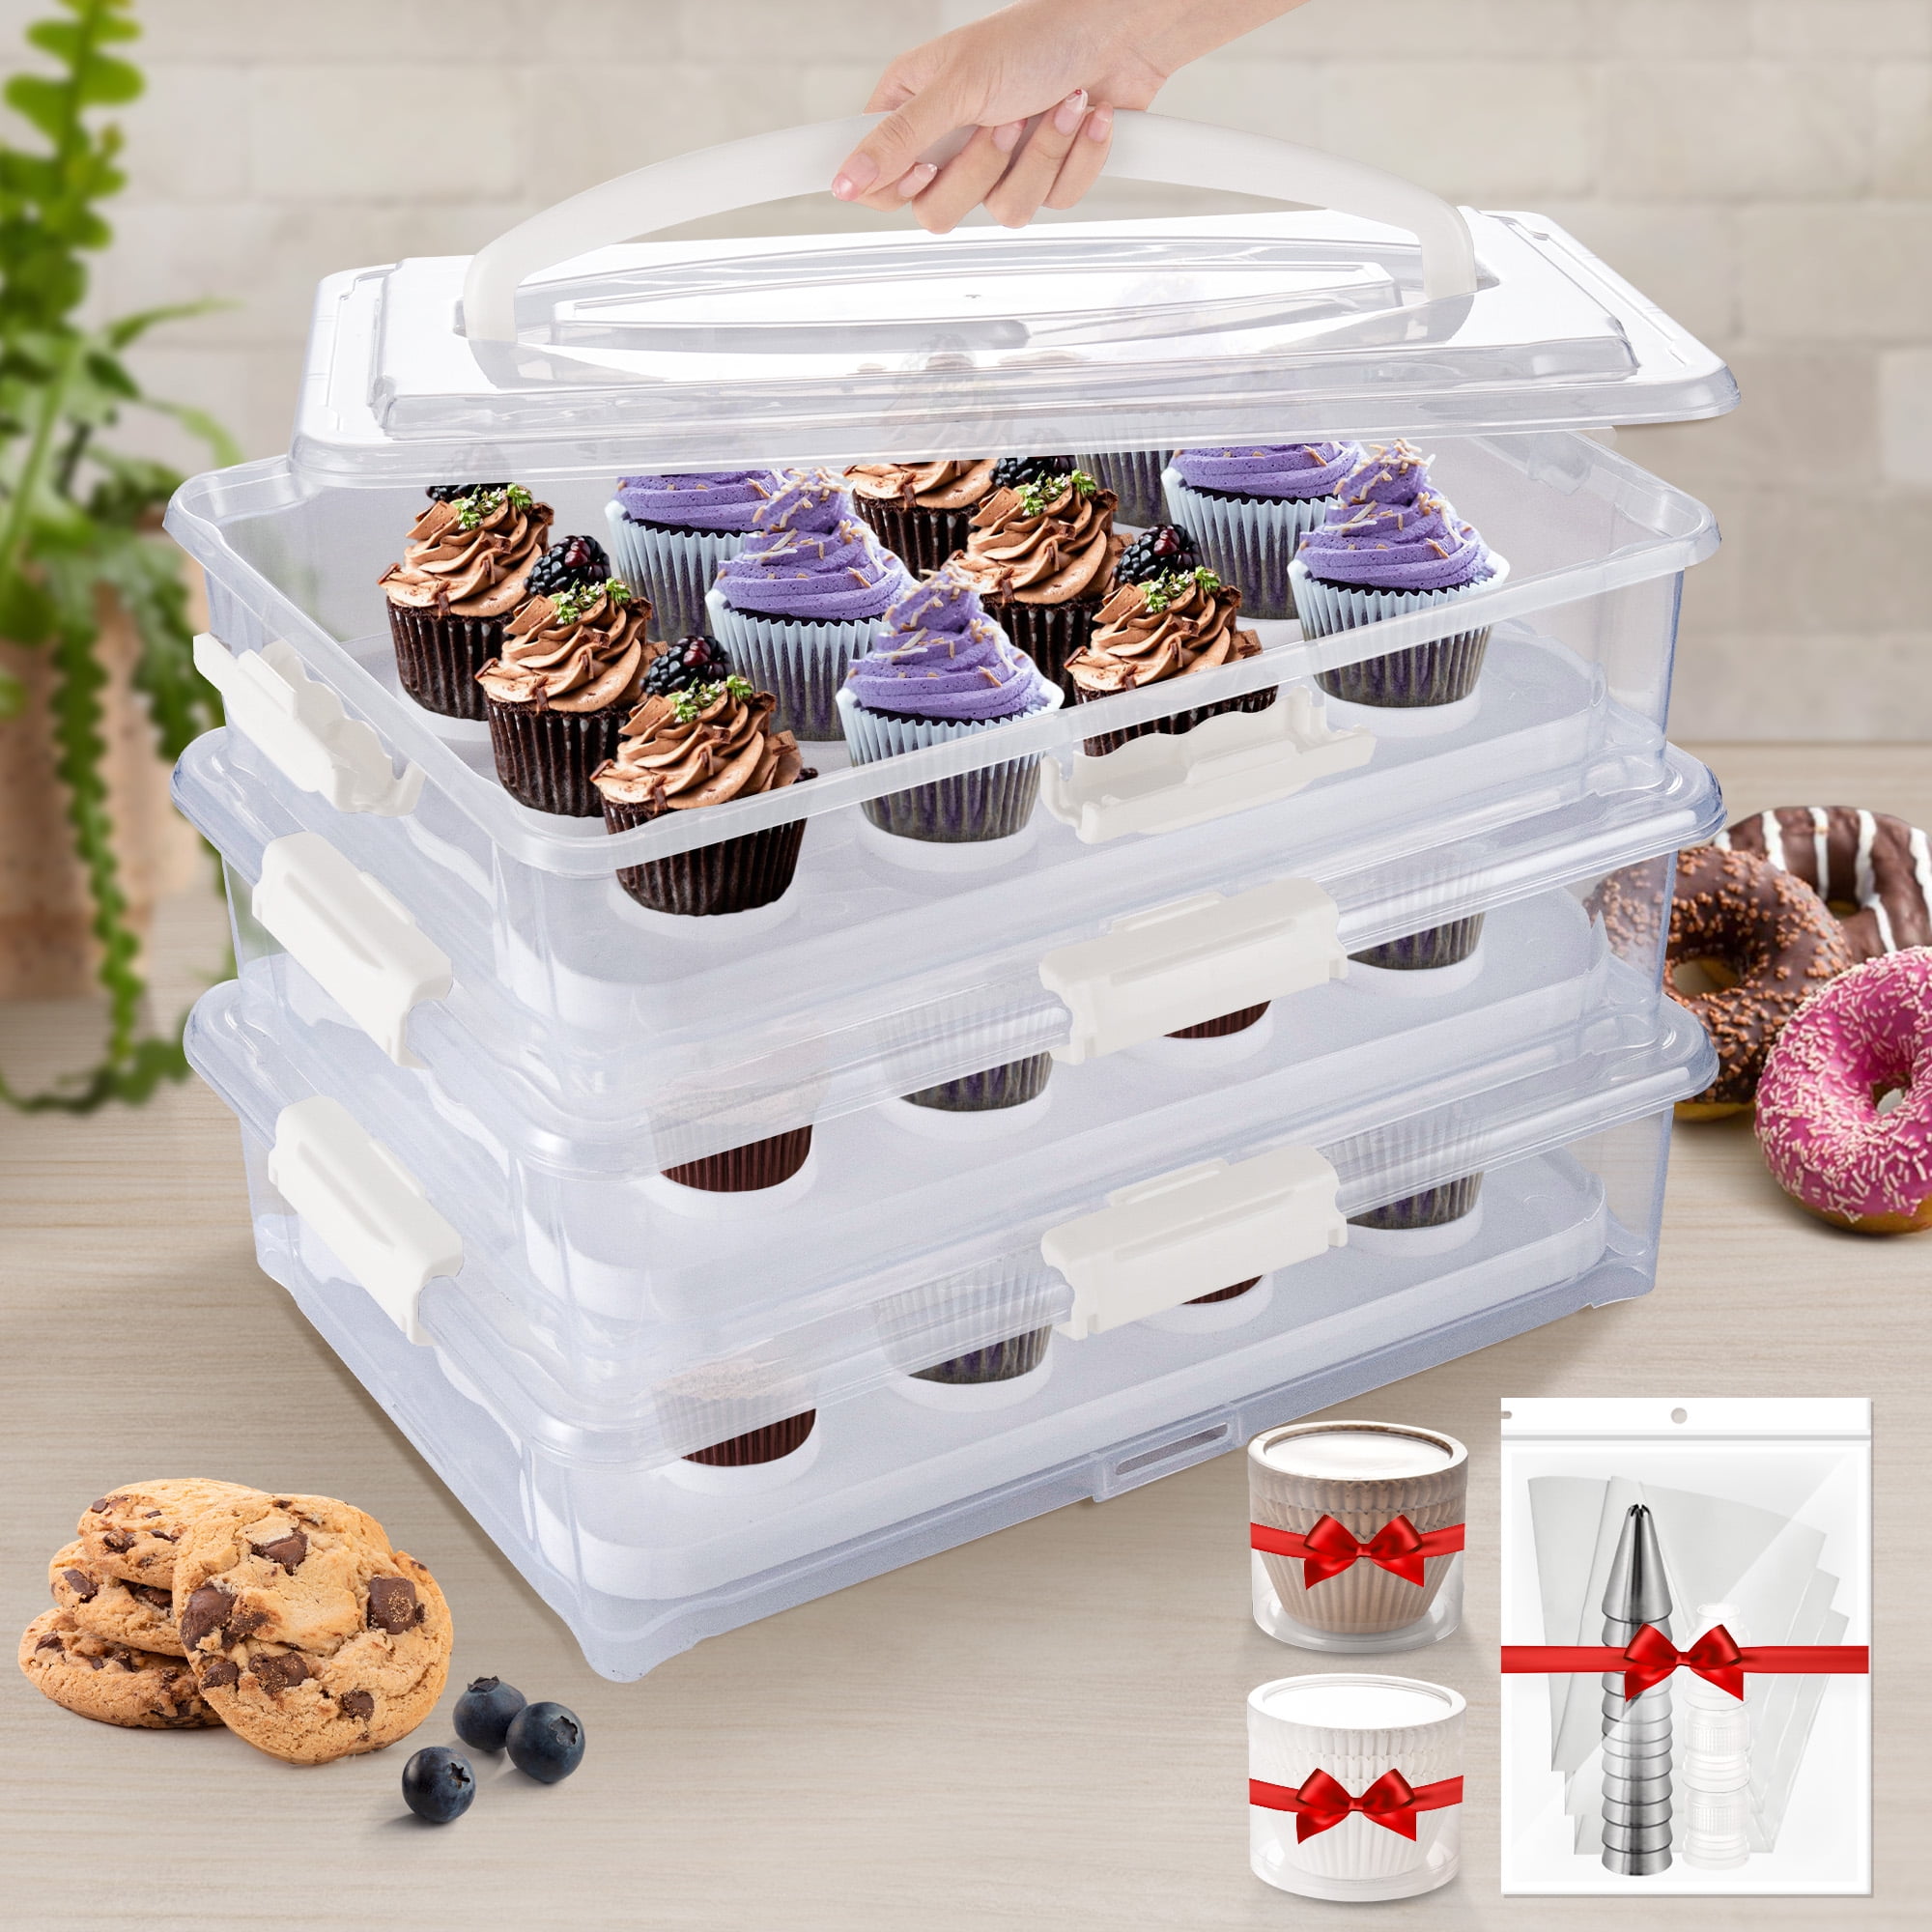 Arc 3-Tiers Cupcake Carrier White - Cupcake Portable Storage Box Dessert Holder with Lid and HandleGreat for Party.Cake Transport Container Store Up